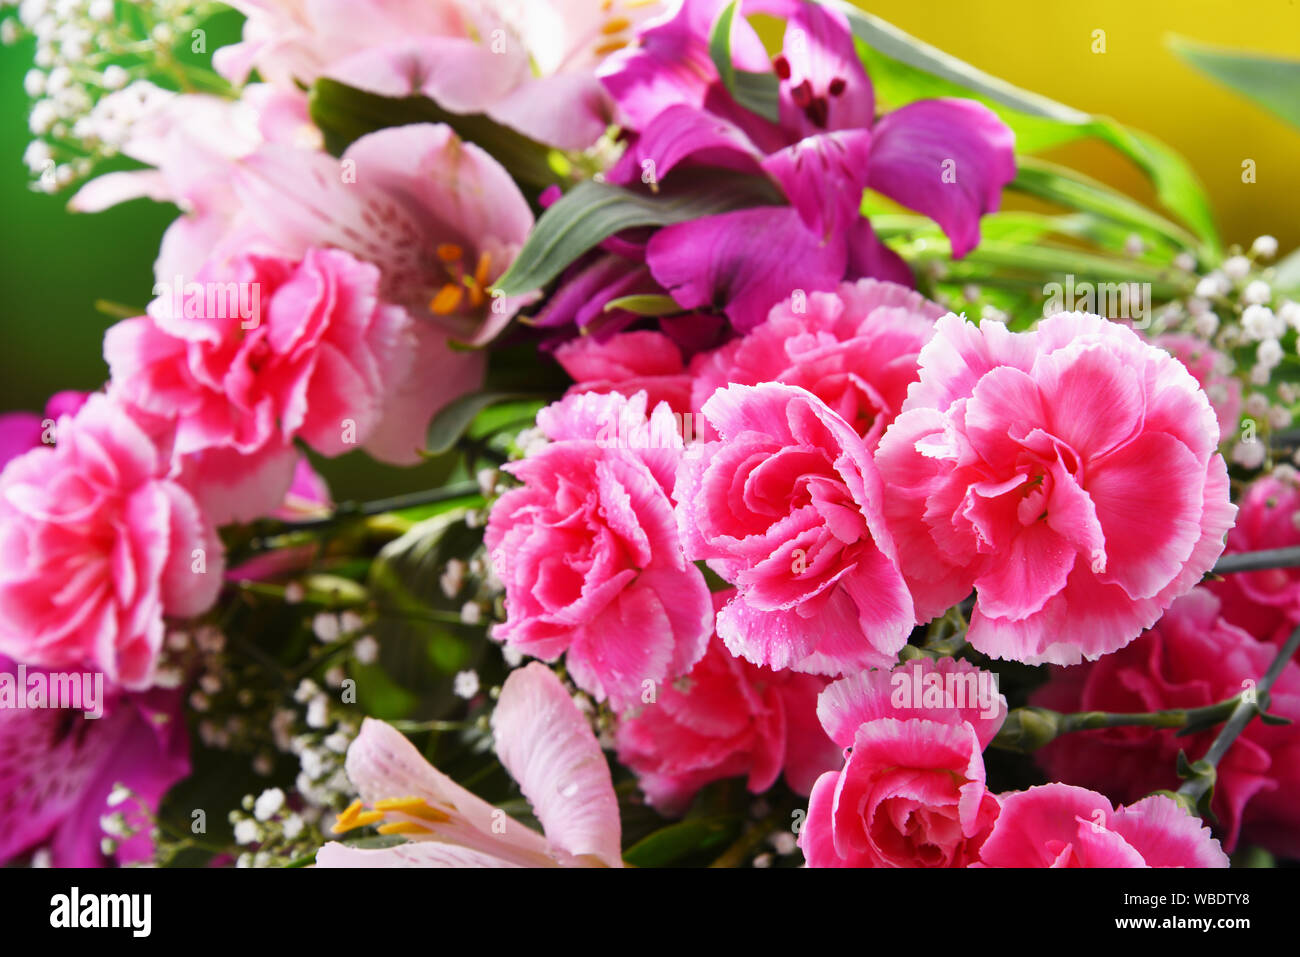 Composition with bouquet of freshly cut flowers. Stock Photo